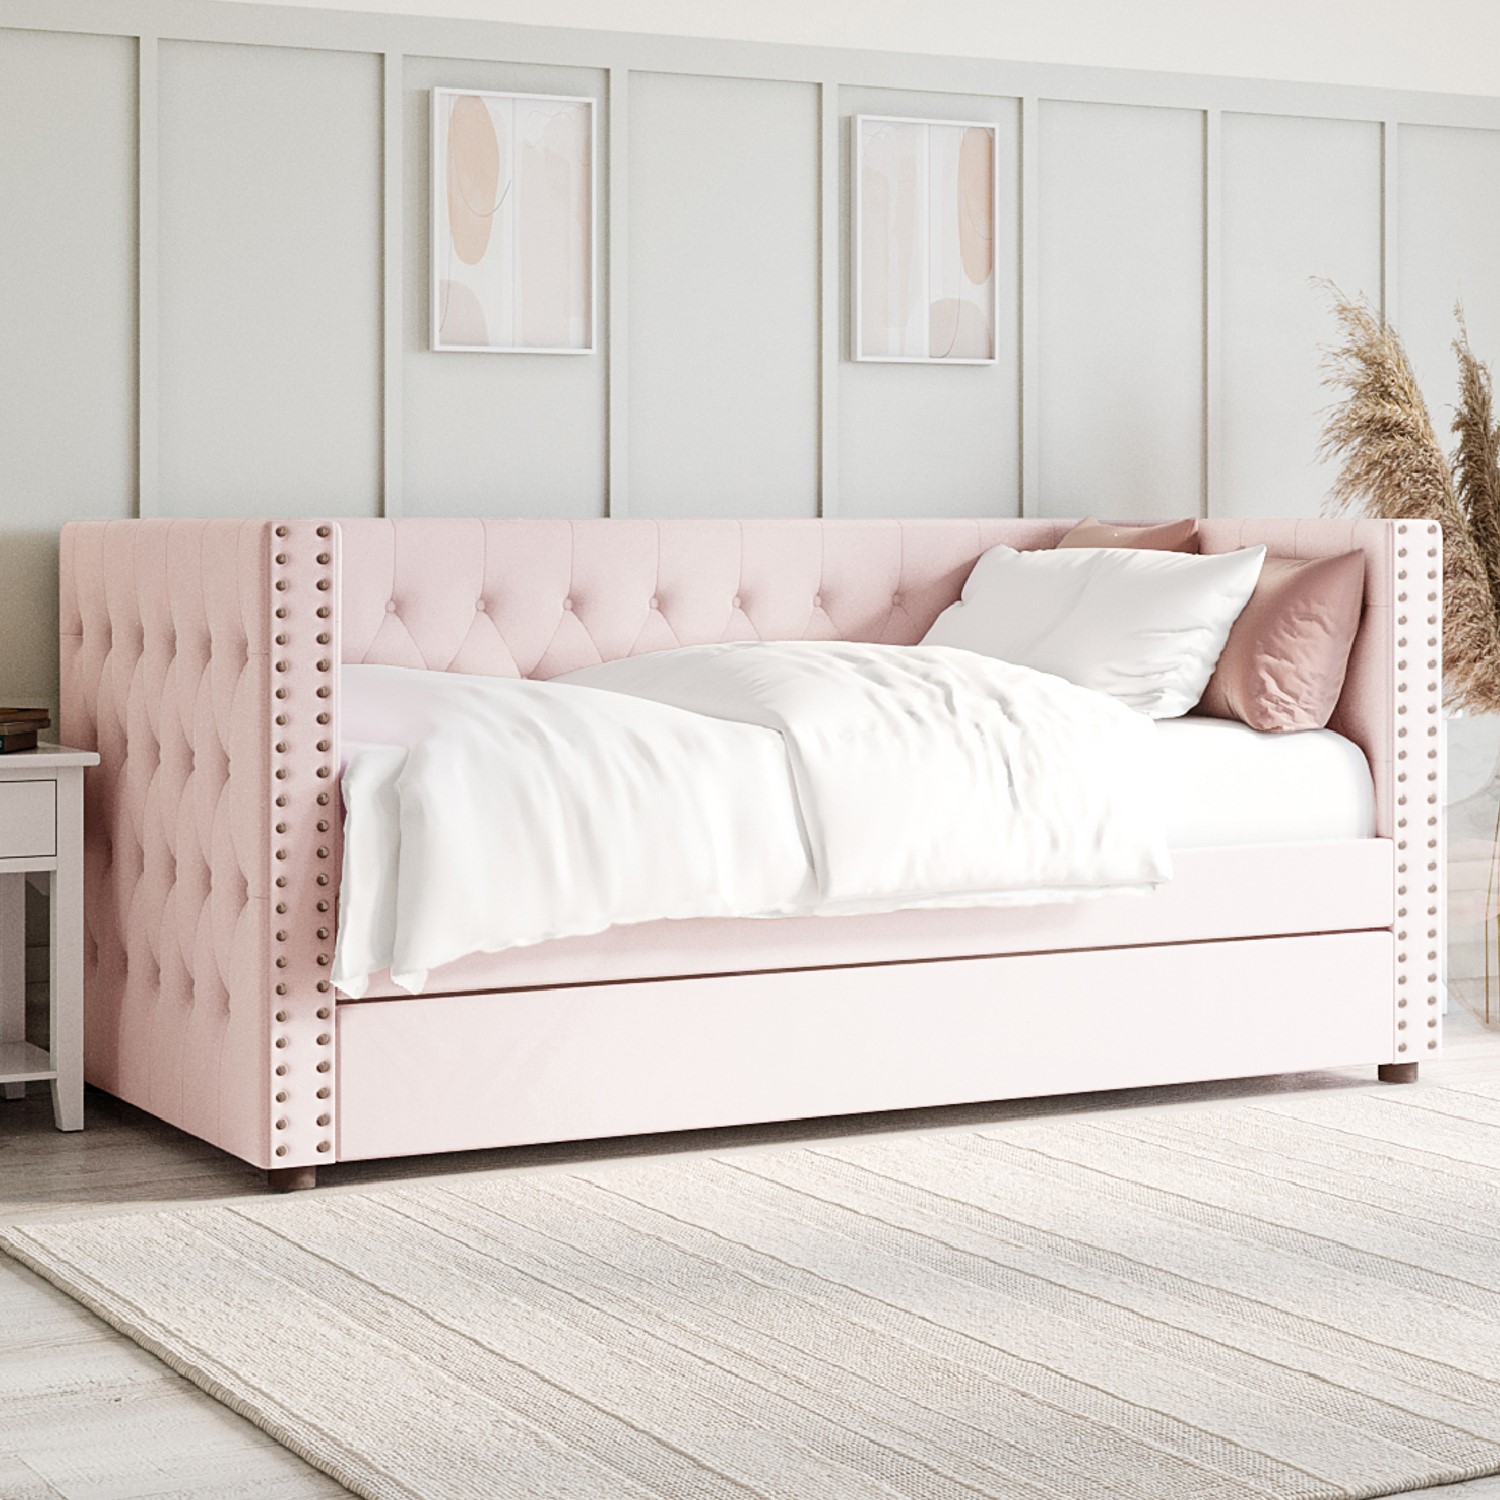 Read more about Single day bed sofa with trundle in pink velvet sacha